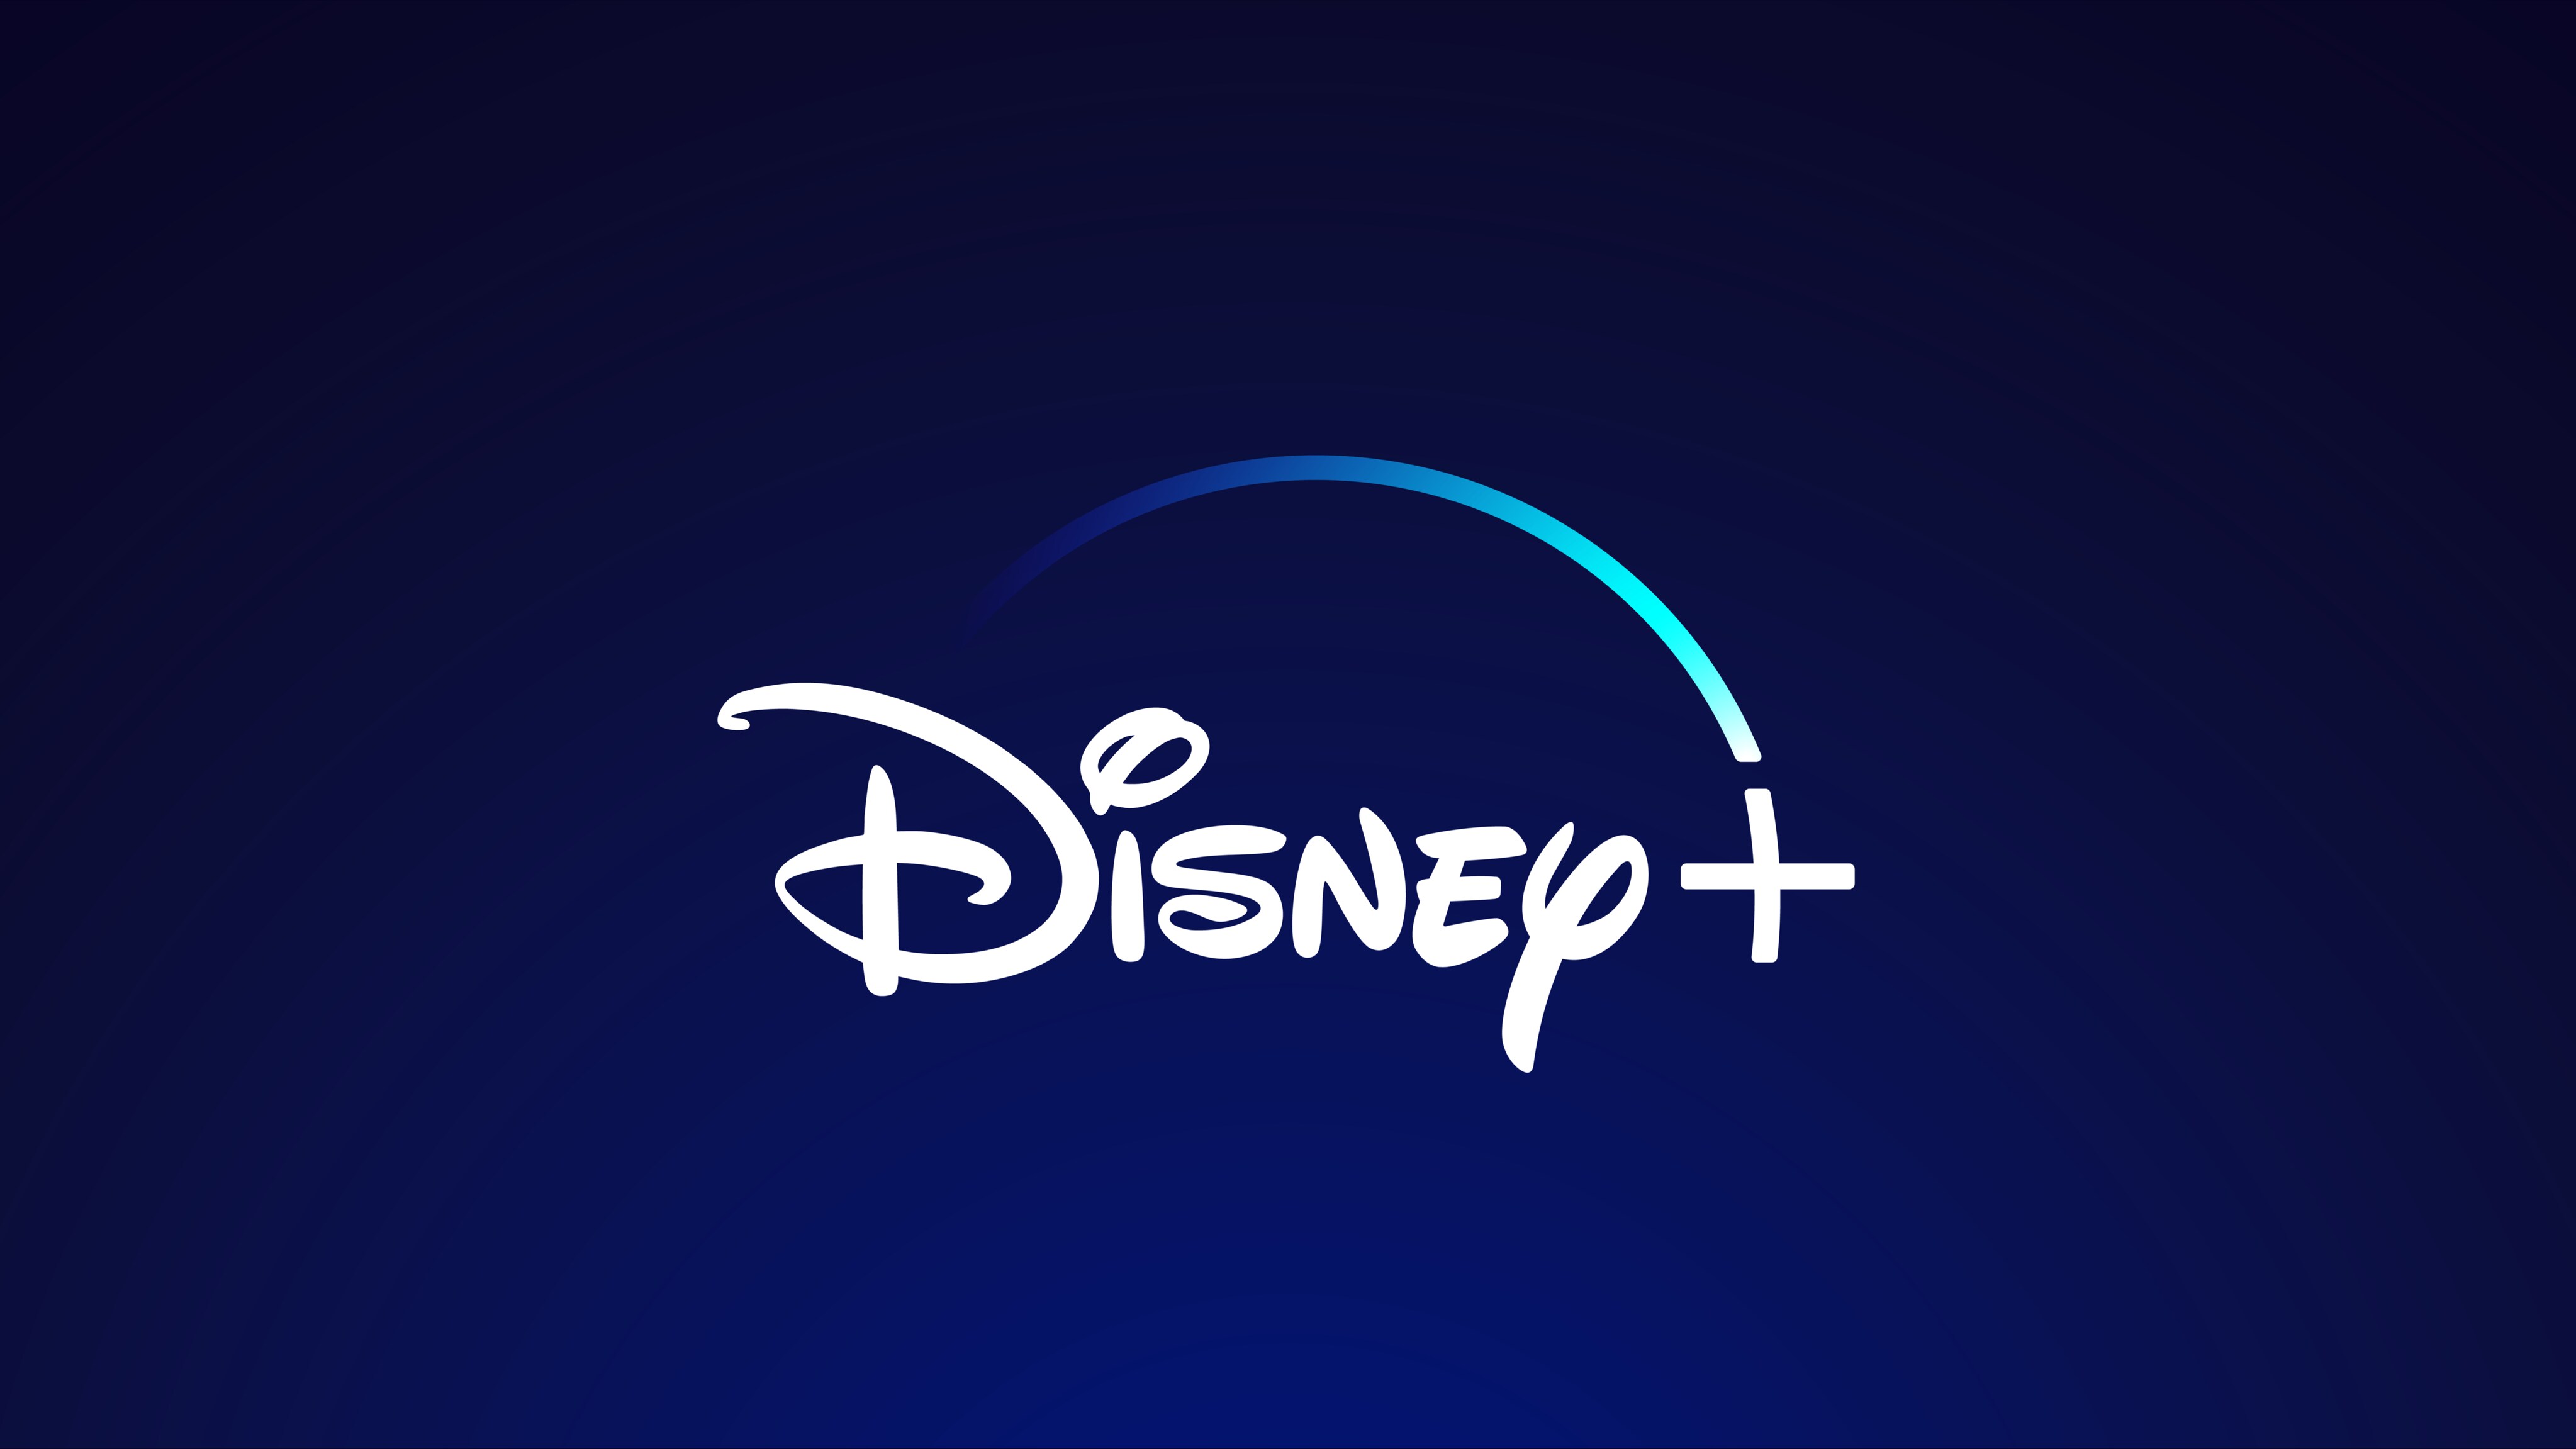 Disney+ Heats Up With “Summer Movie Nights” Featuring Brand New Original Movies And Blockbuster Hits